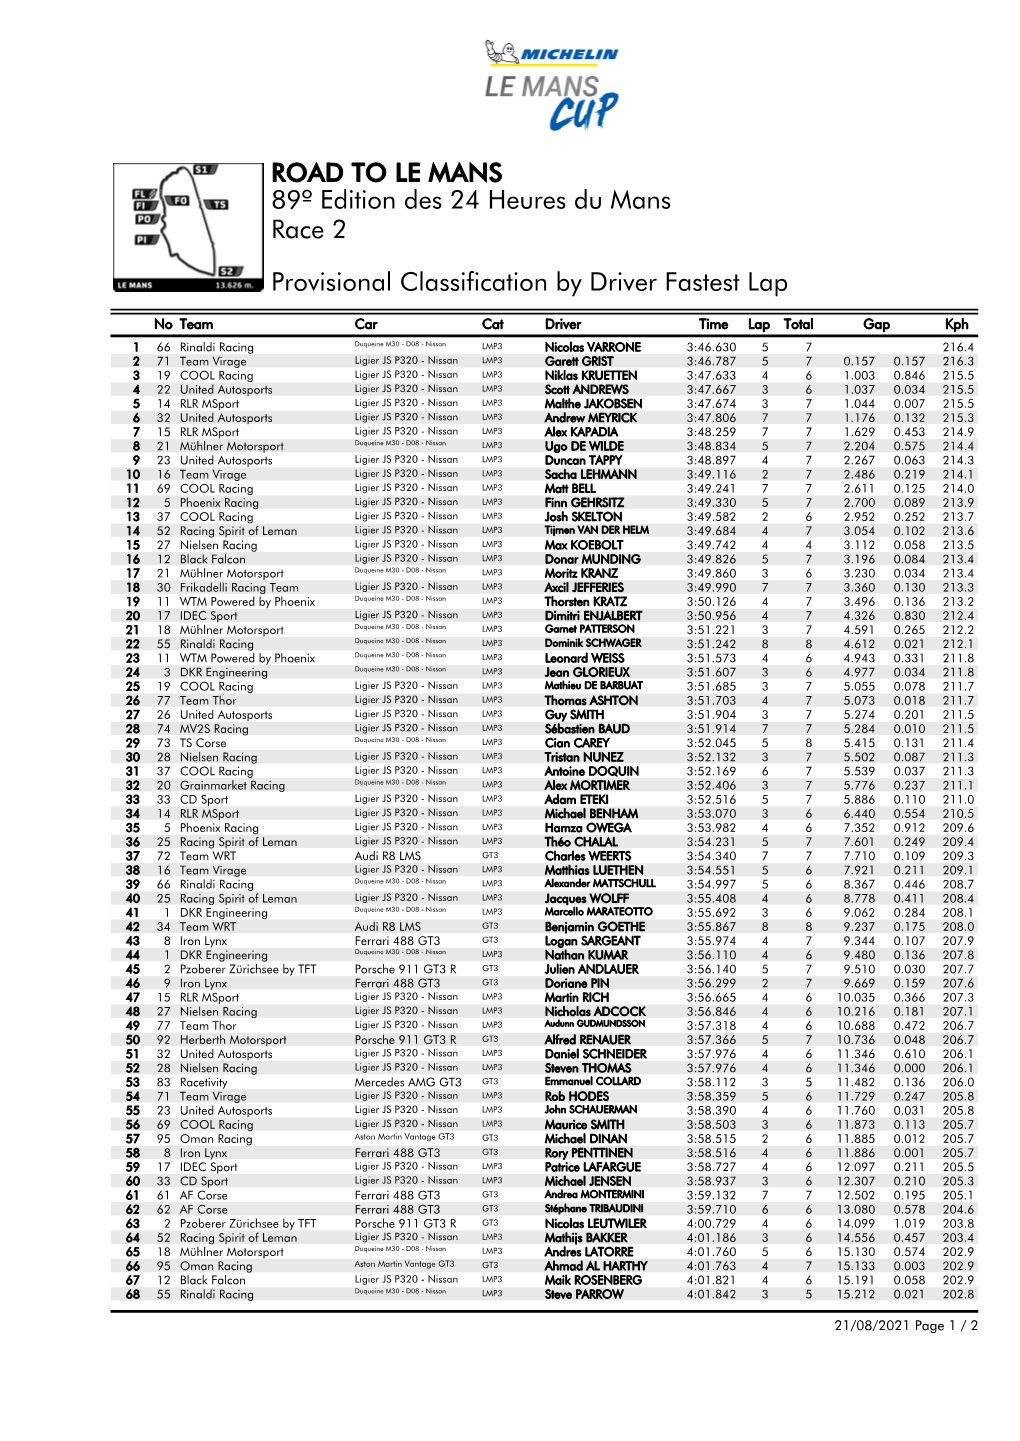 Fastest Lap by Driver